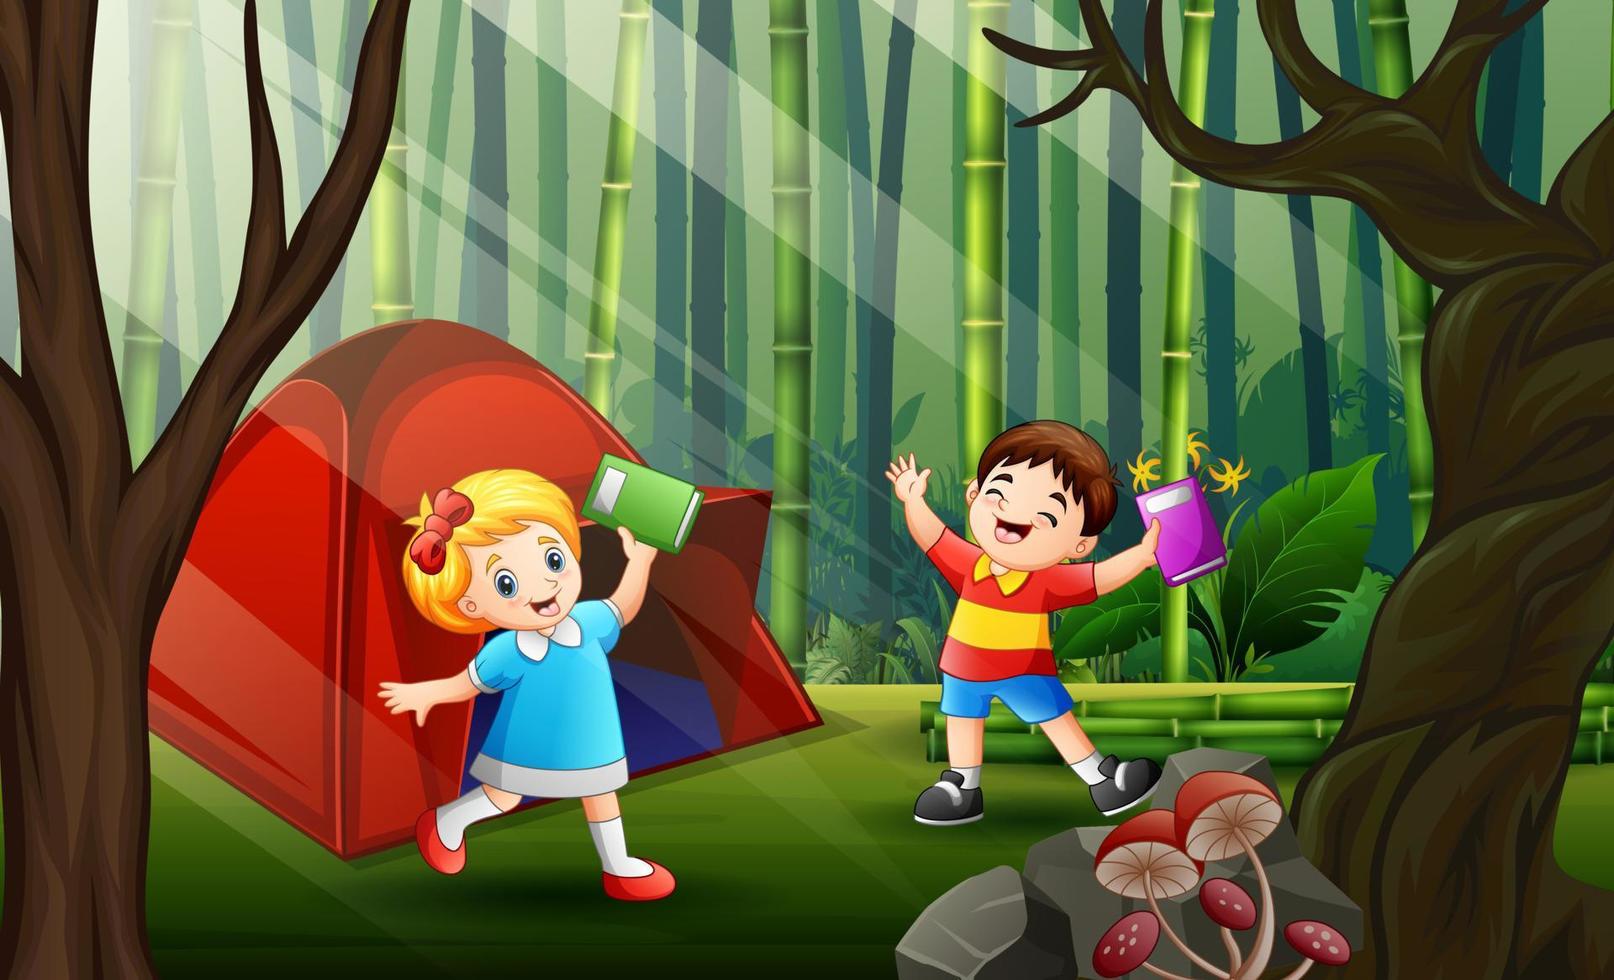 Happy children camping in the forest illustration vector